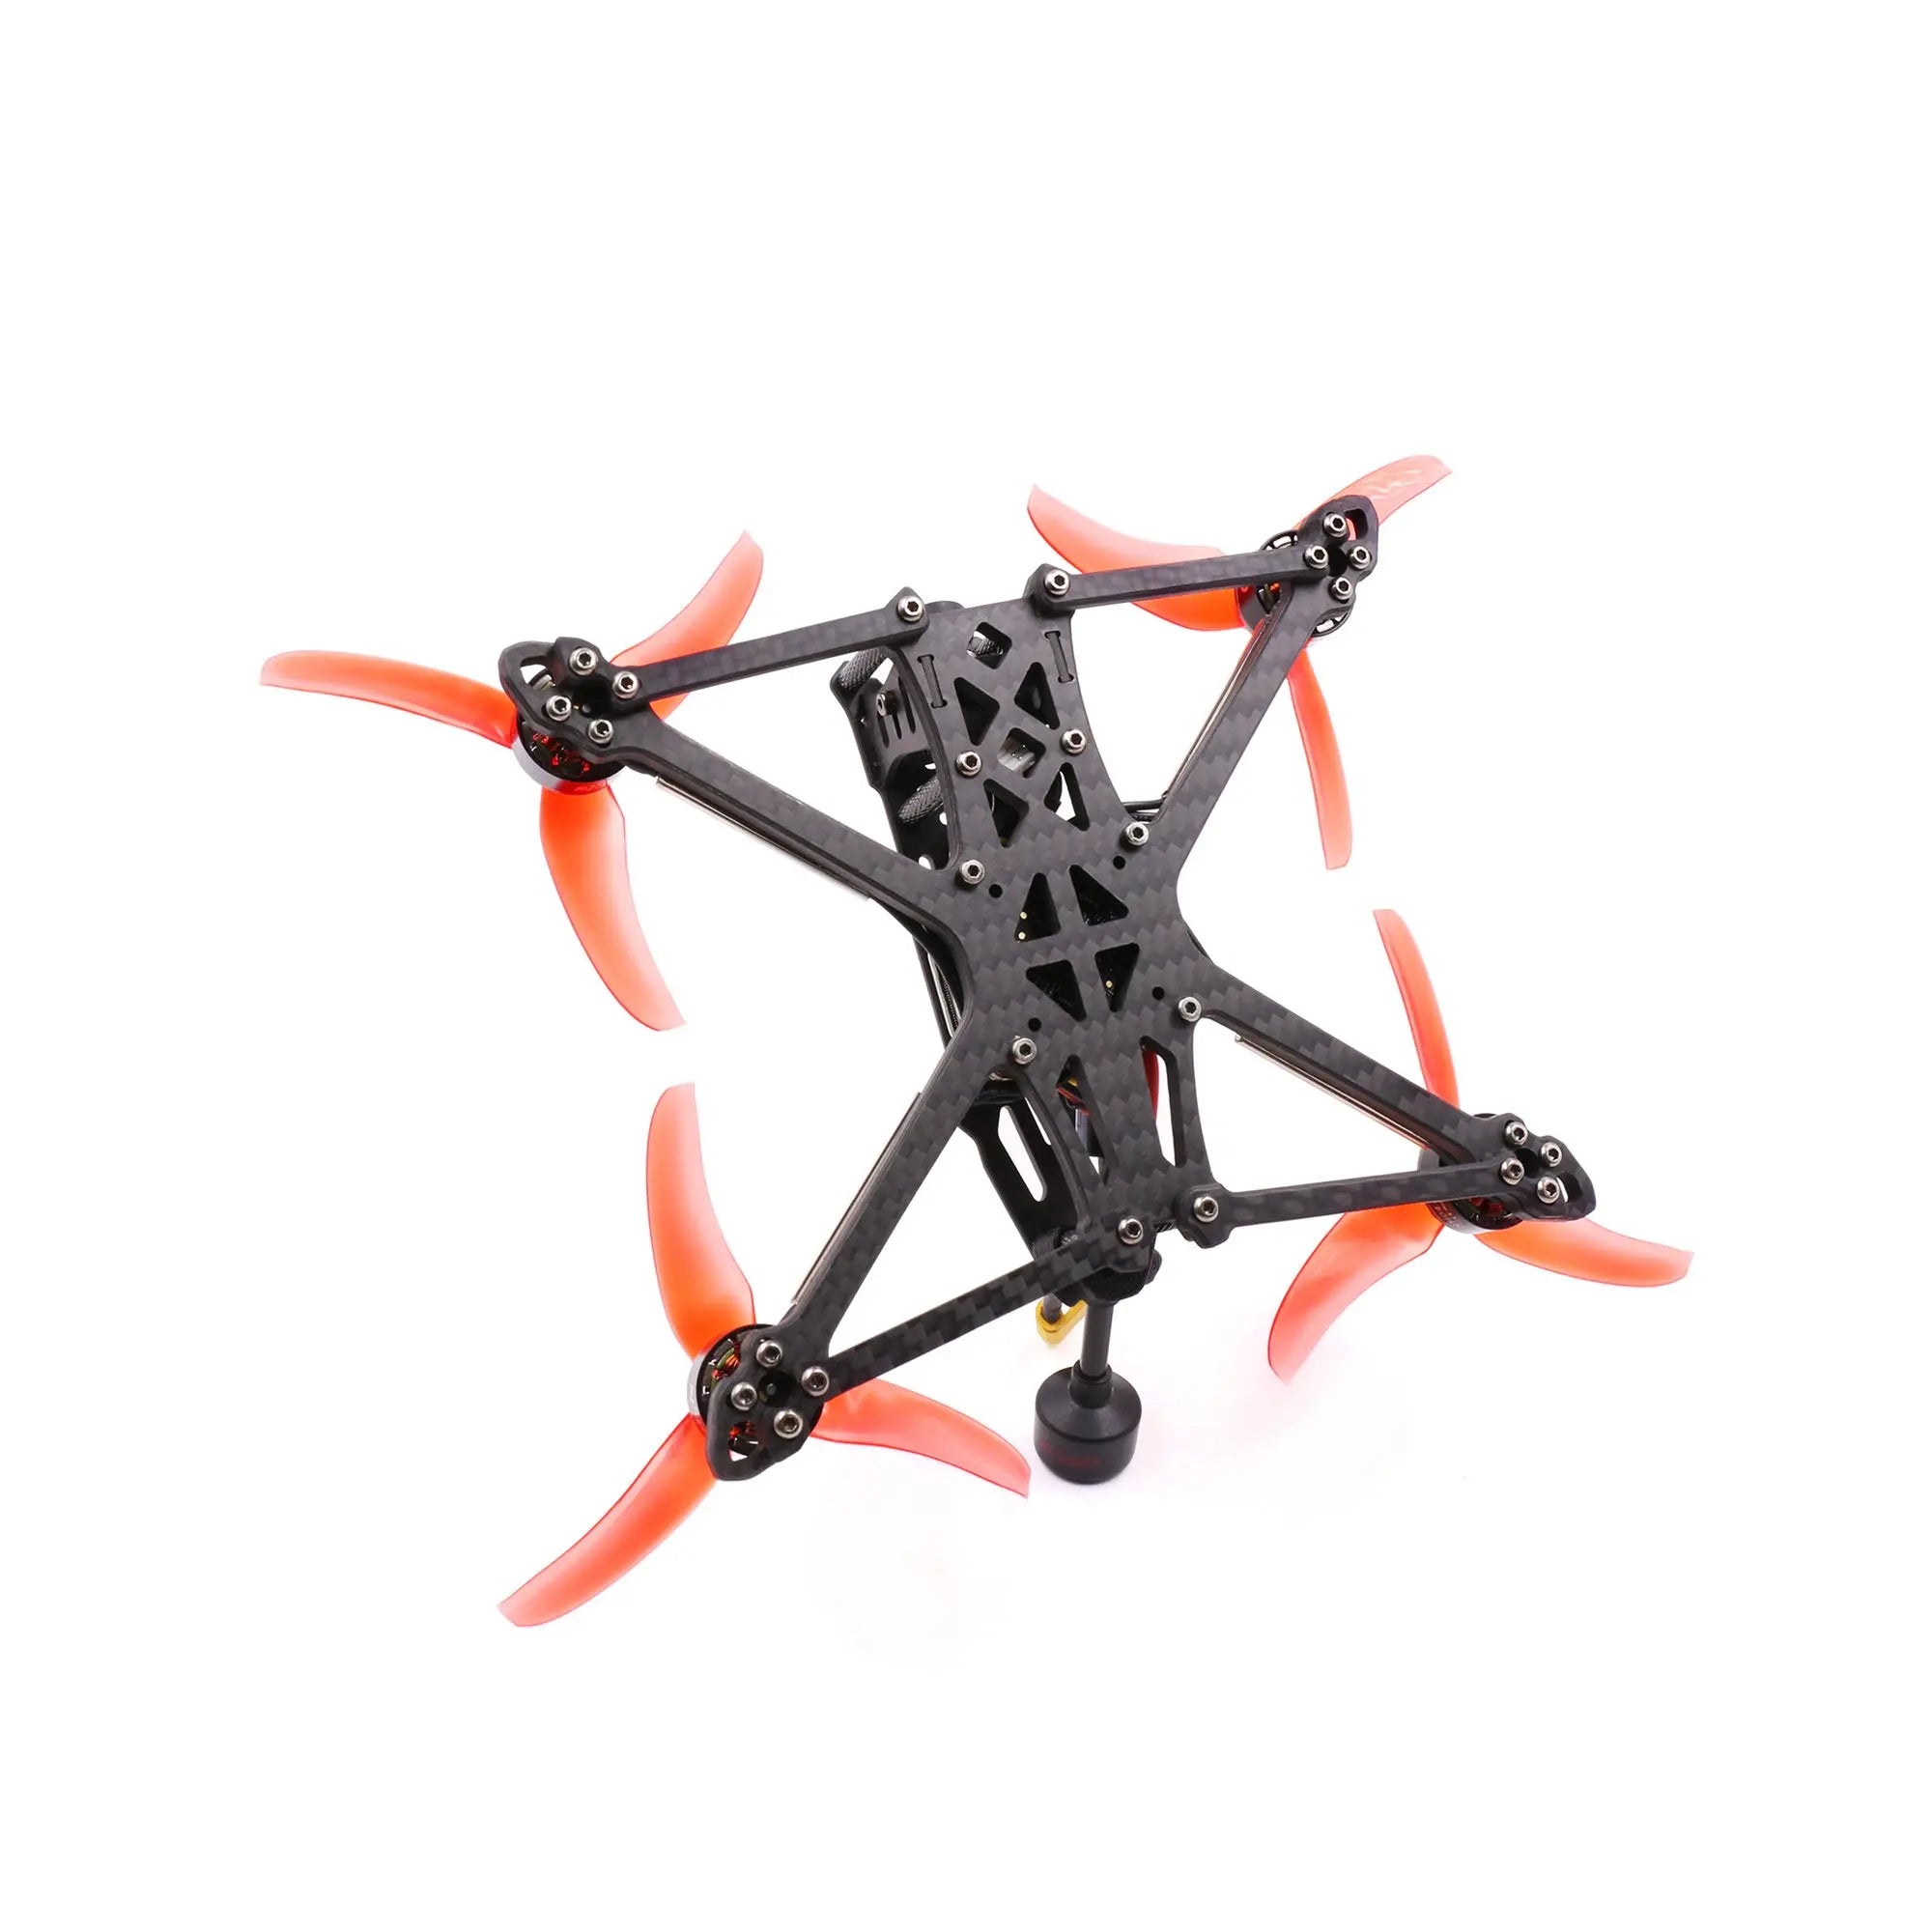 GEPRC SMART 35 FPV Drone, SMART 35 Freestyle is the first choice of 3.5-inch Freestyle Drone